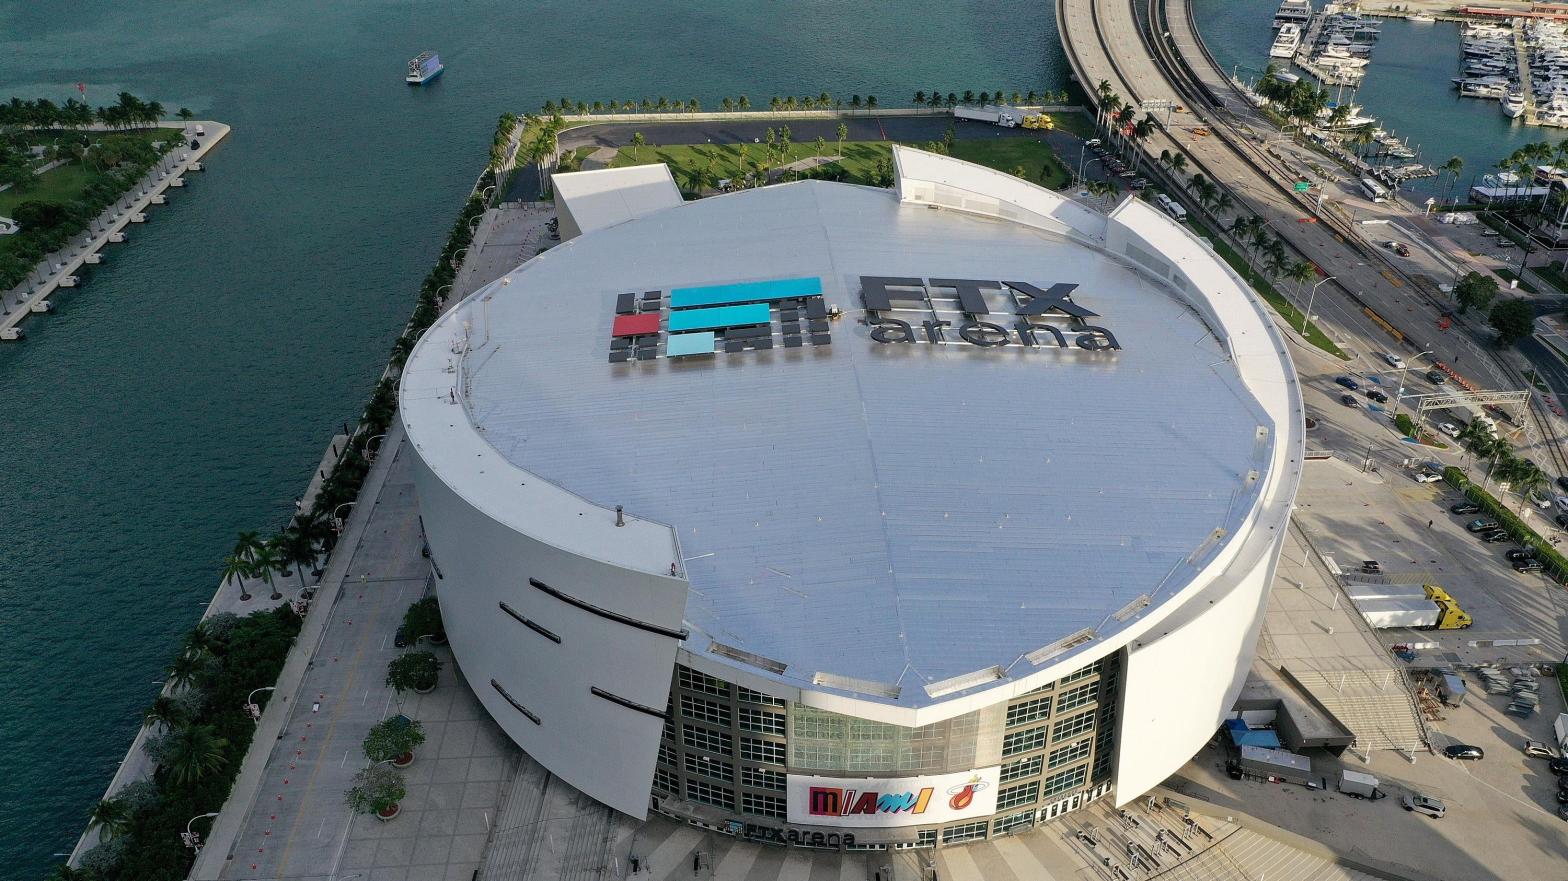 The FTX creditor list also named the Miami-based Basketball Properties LTD as a creditor. FTX bought the rights to the home of the Miami Heat's home arena for $US135 ($187) million in 2021. The Miami-Dade County government has since terminated that 19-year contract. (Photo: Joe Raedle, Getty Images)